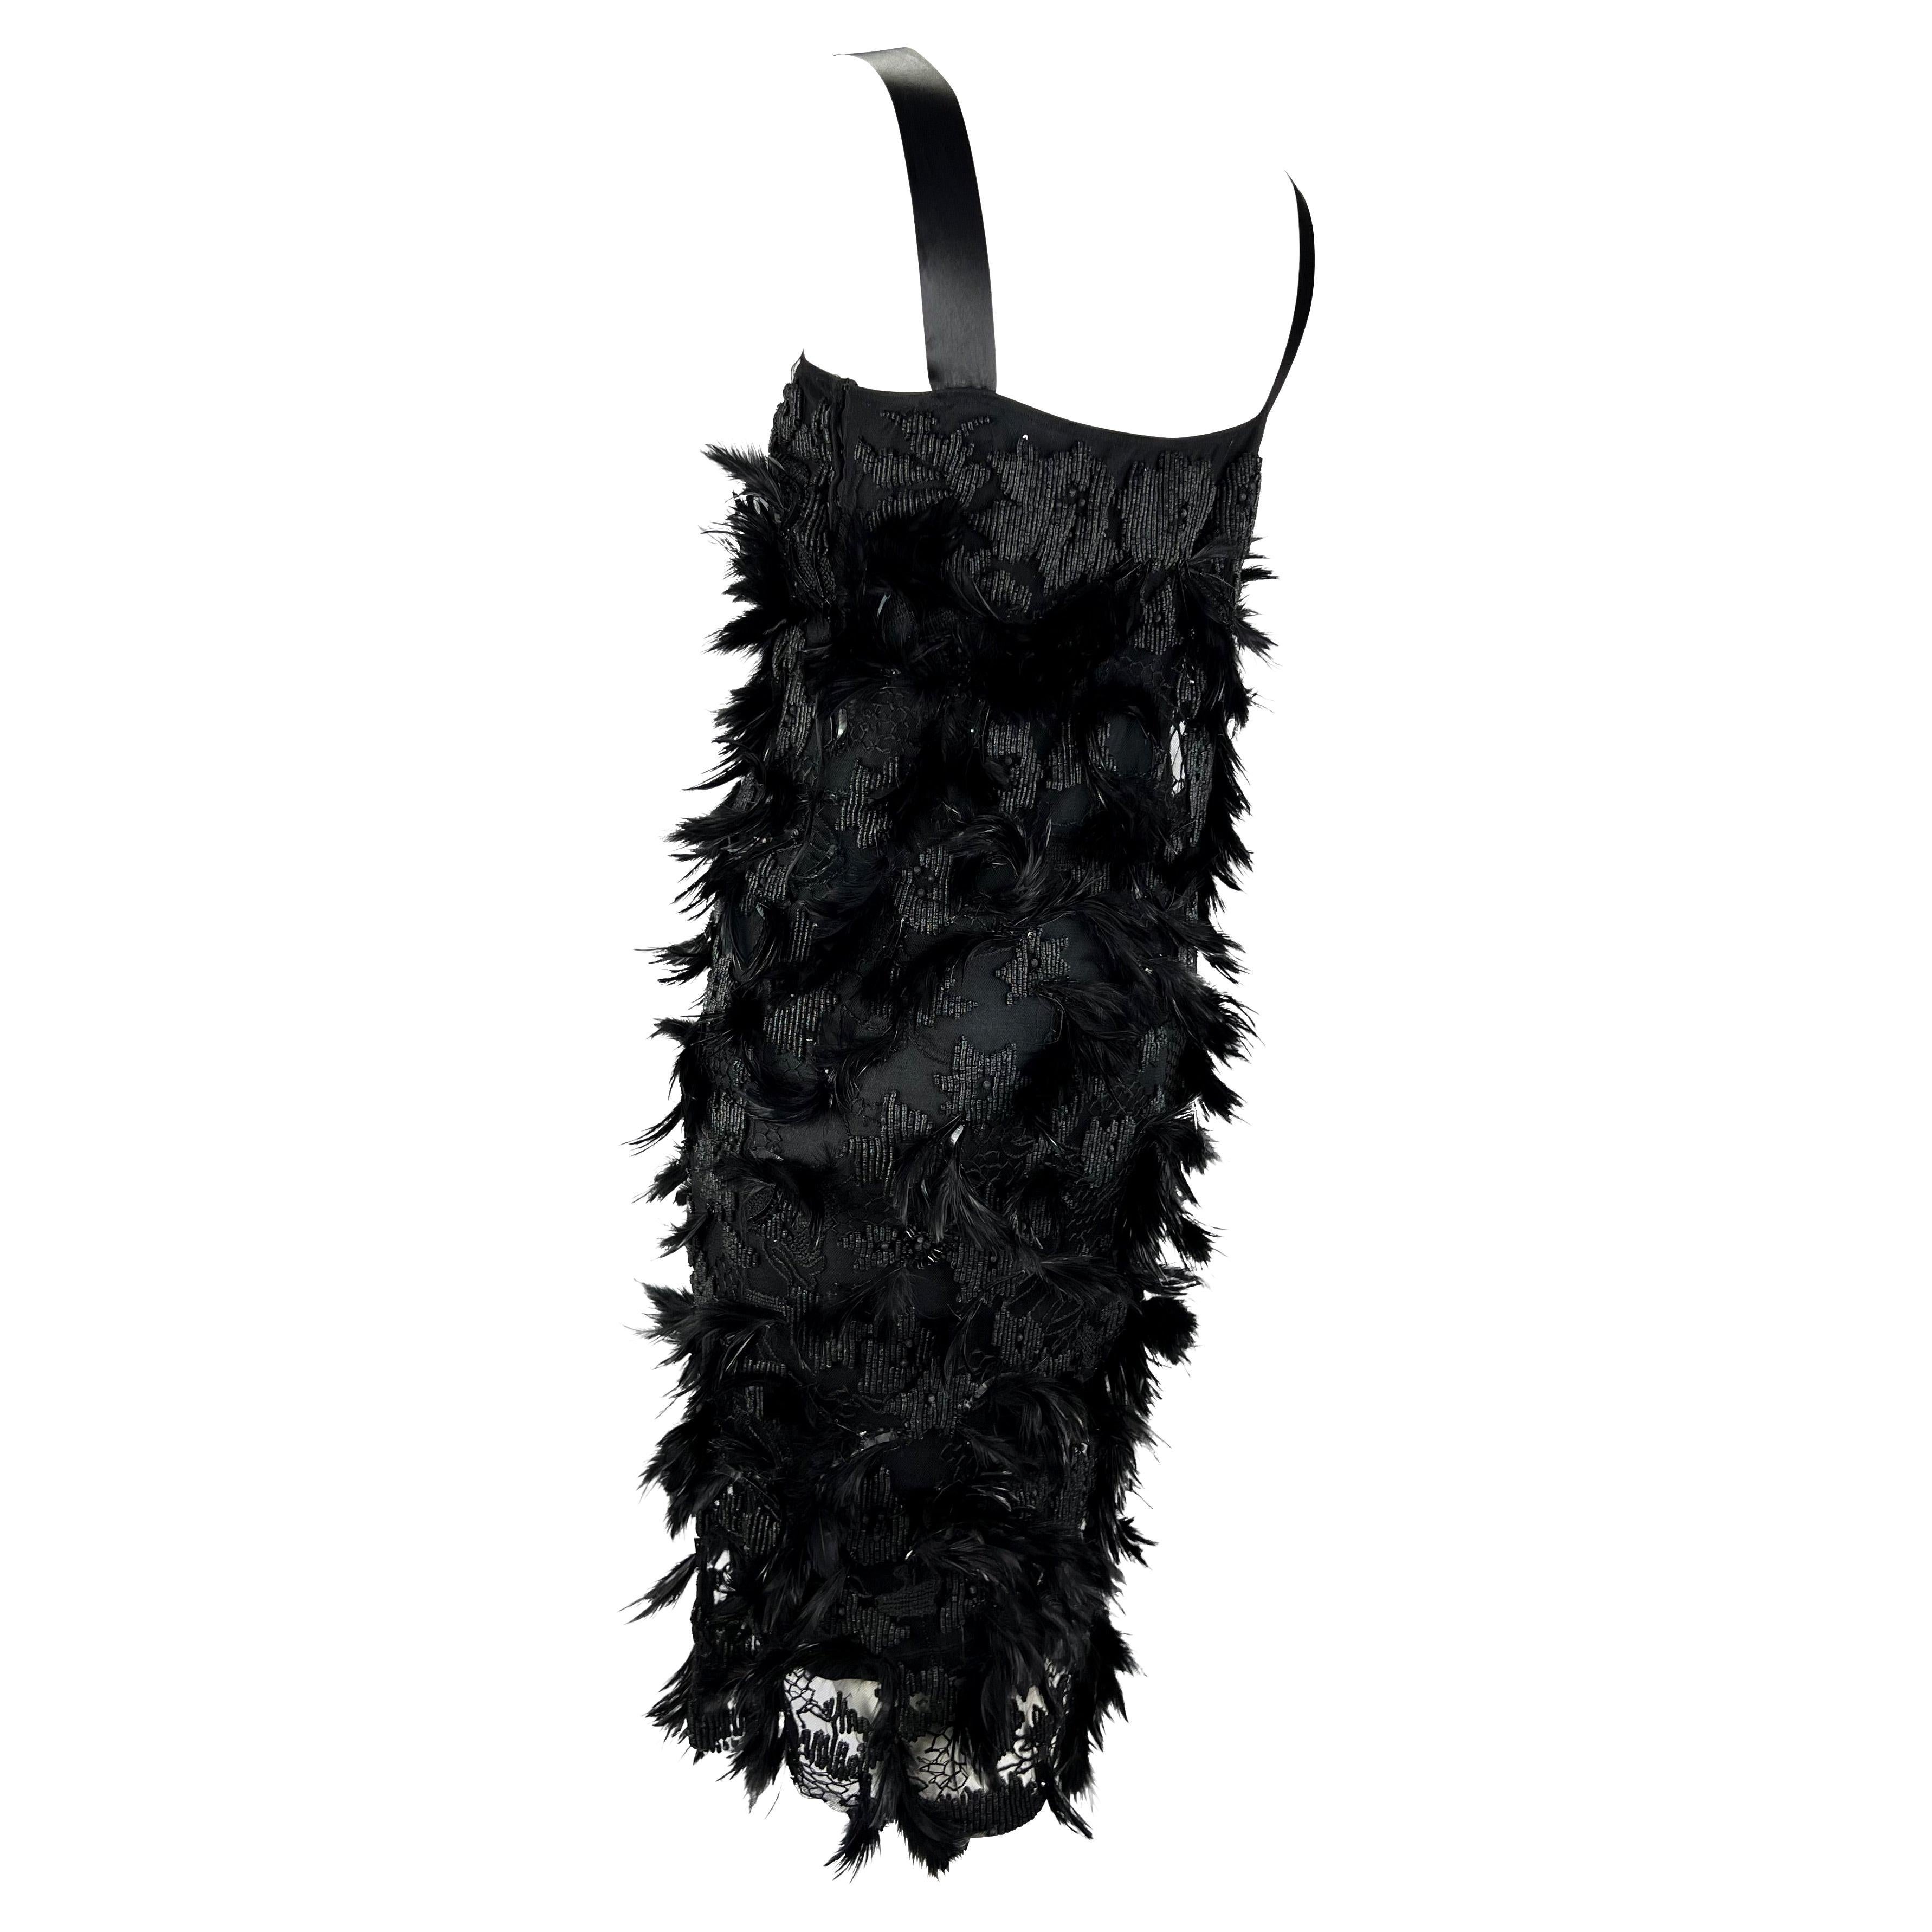 S/S 2001 Yves Saint Laurent by Tom Ford Runway Feather Beaded Ribbon Dress In Good Condition For Sale In West Hollywood, CA